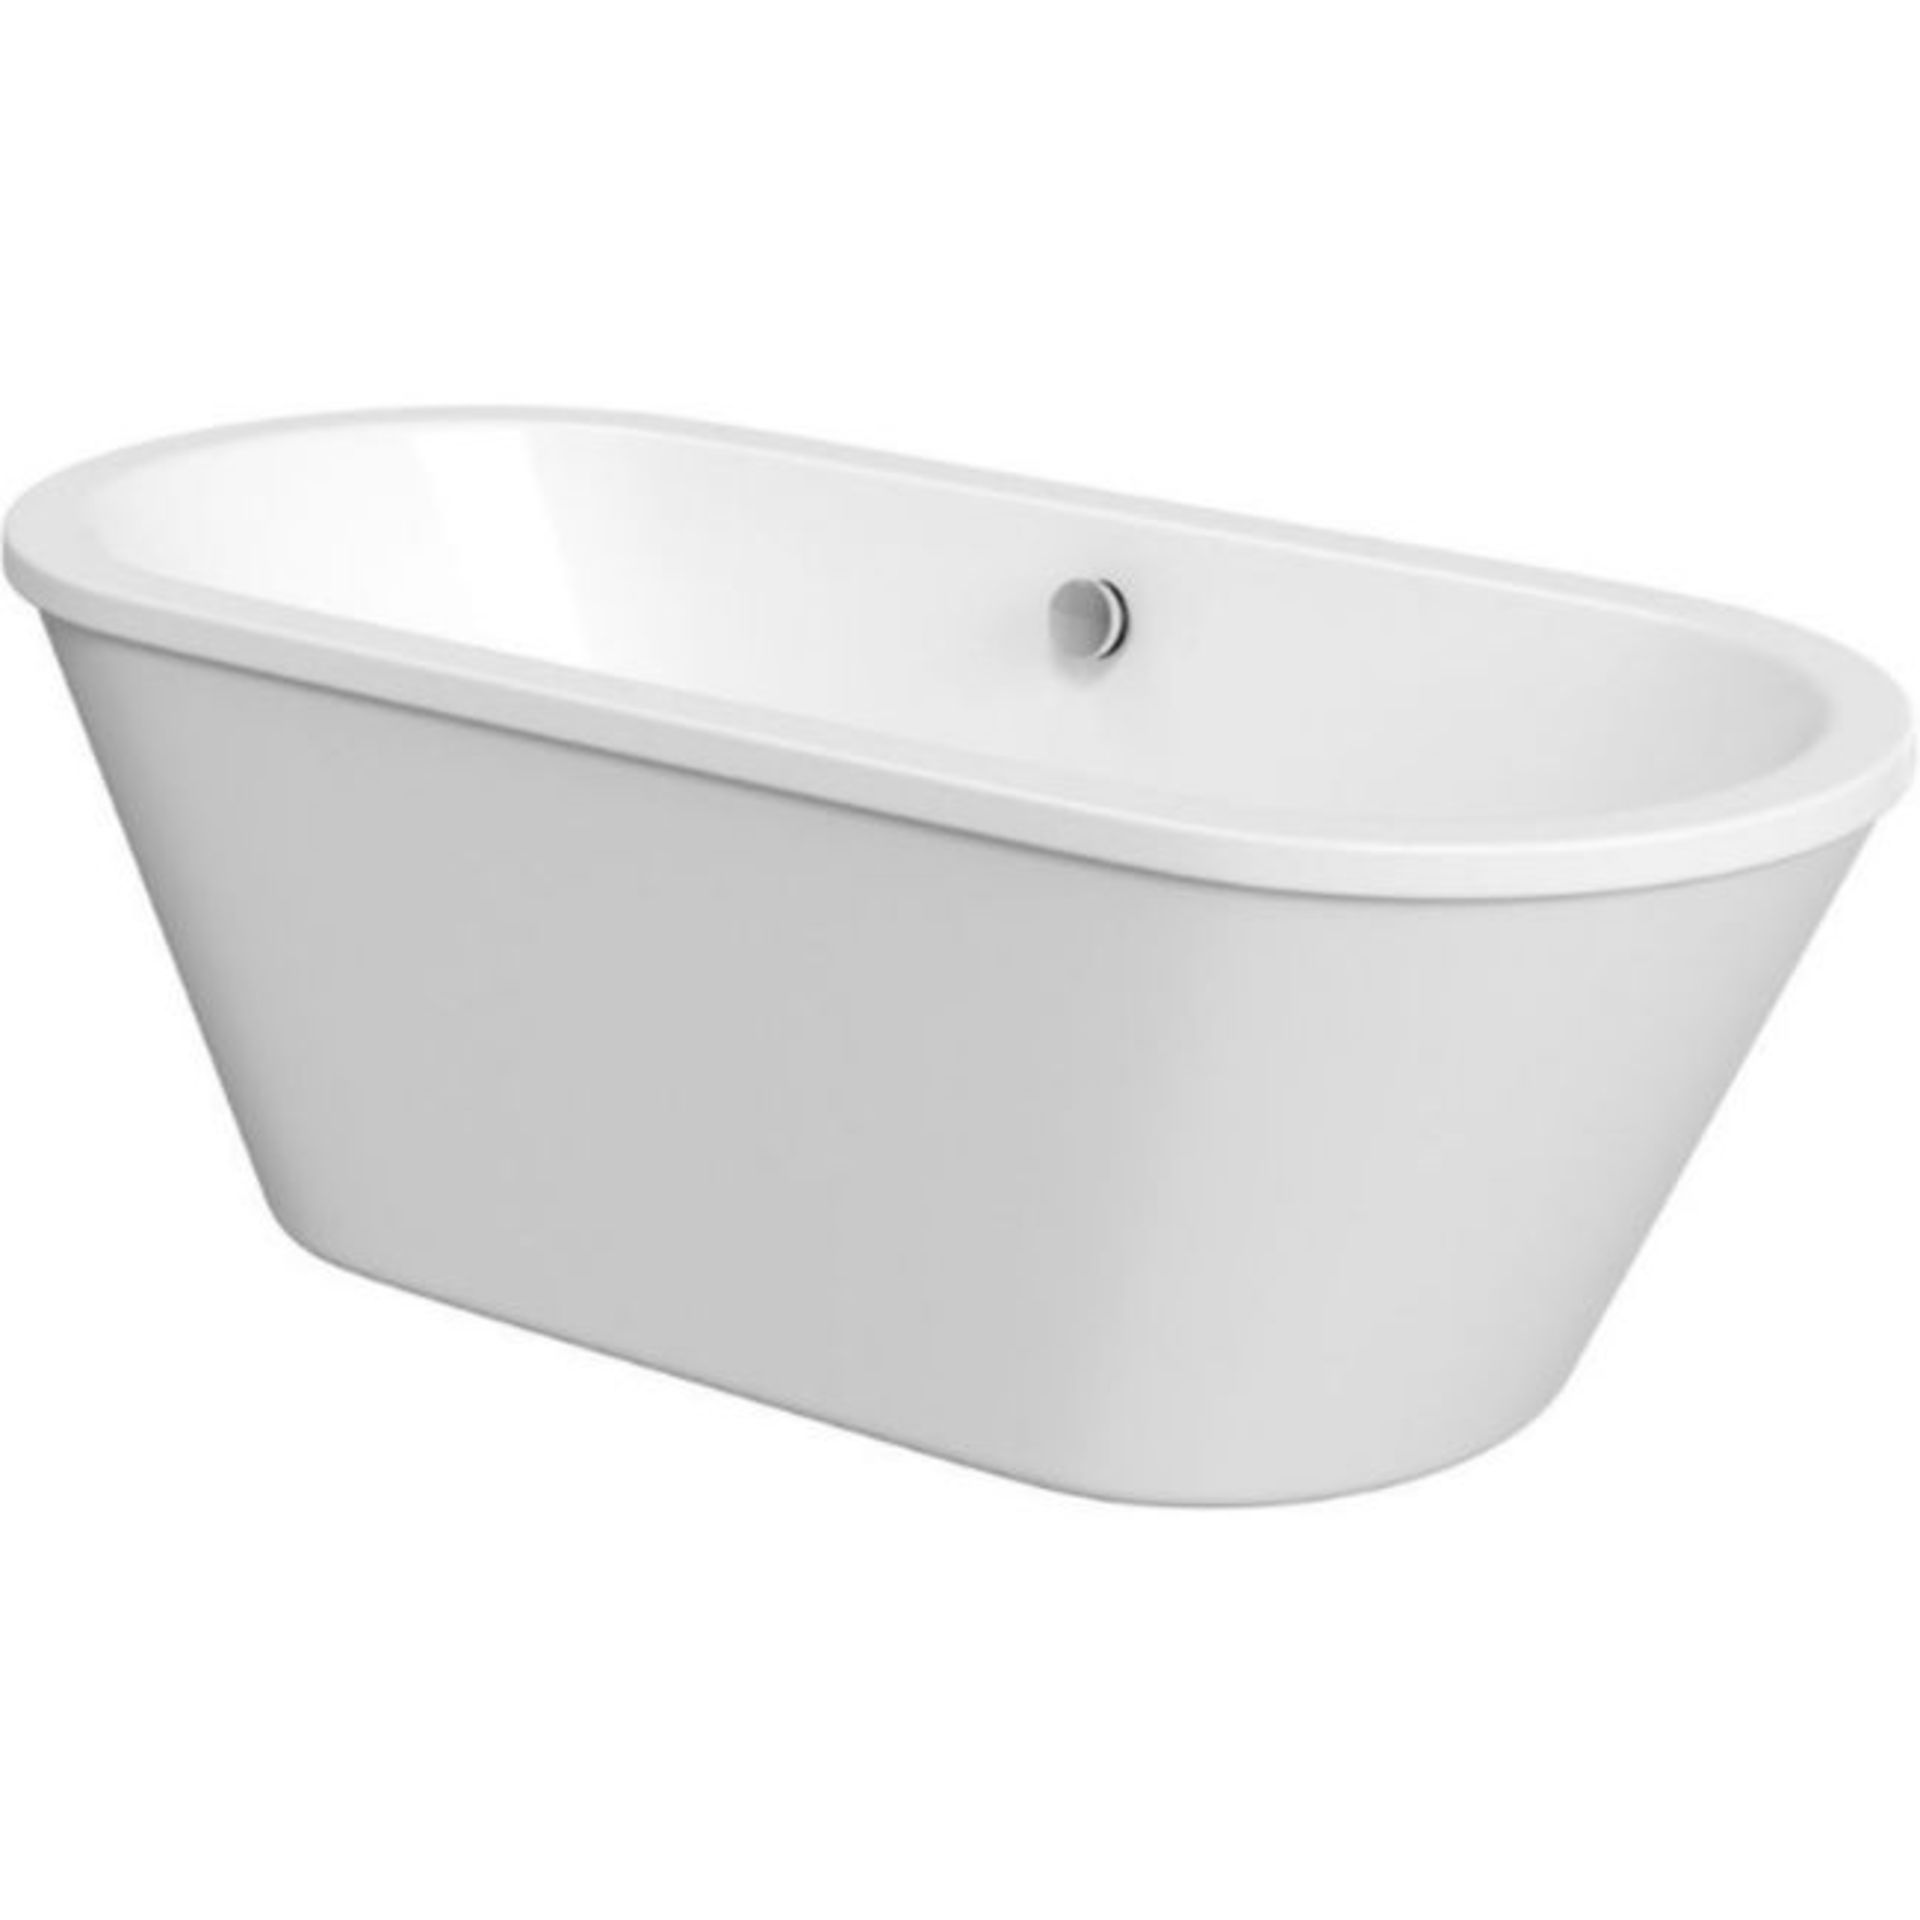 New (S4) Savoy 1700 mm x 755 mm Double Ended White Freestanding Bath. RRP £2,499.The Savoy Doub... - Image 2 of 2